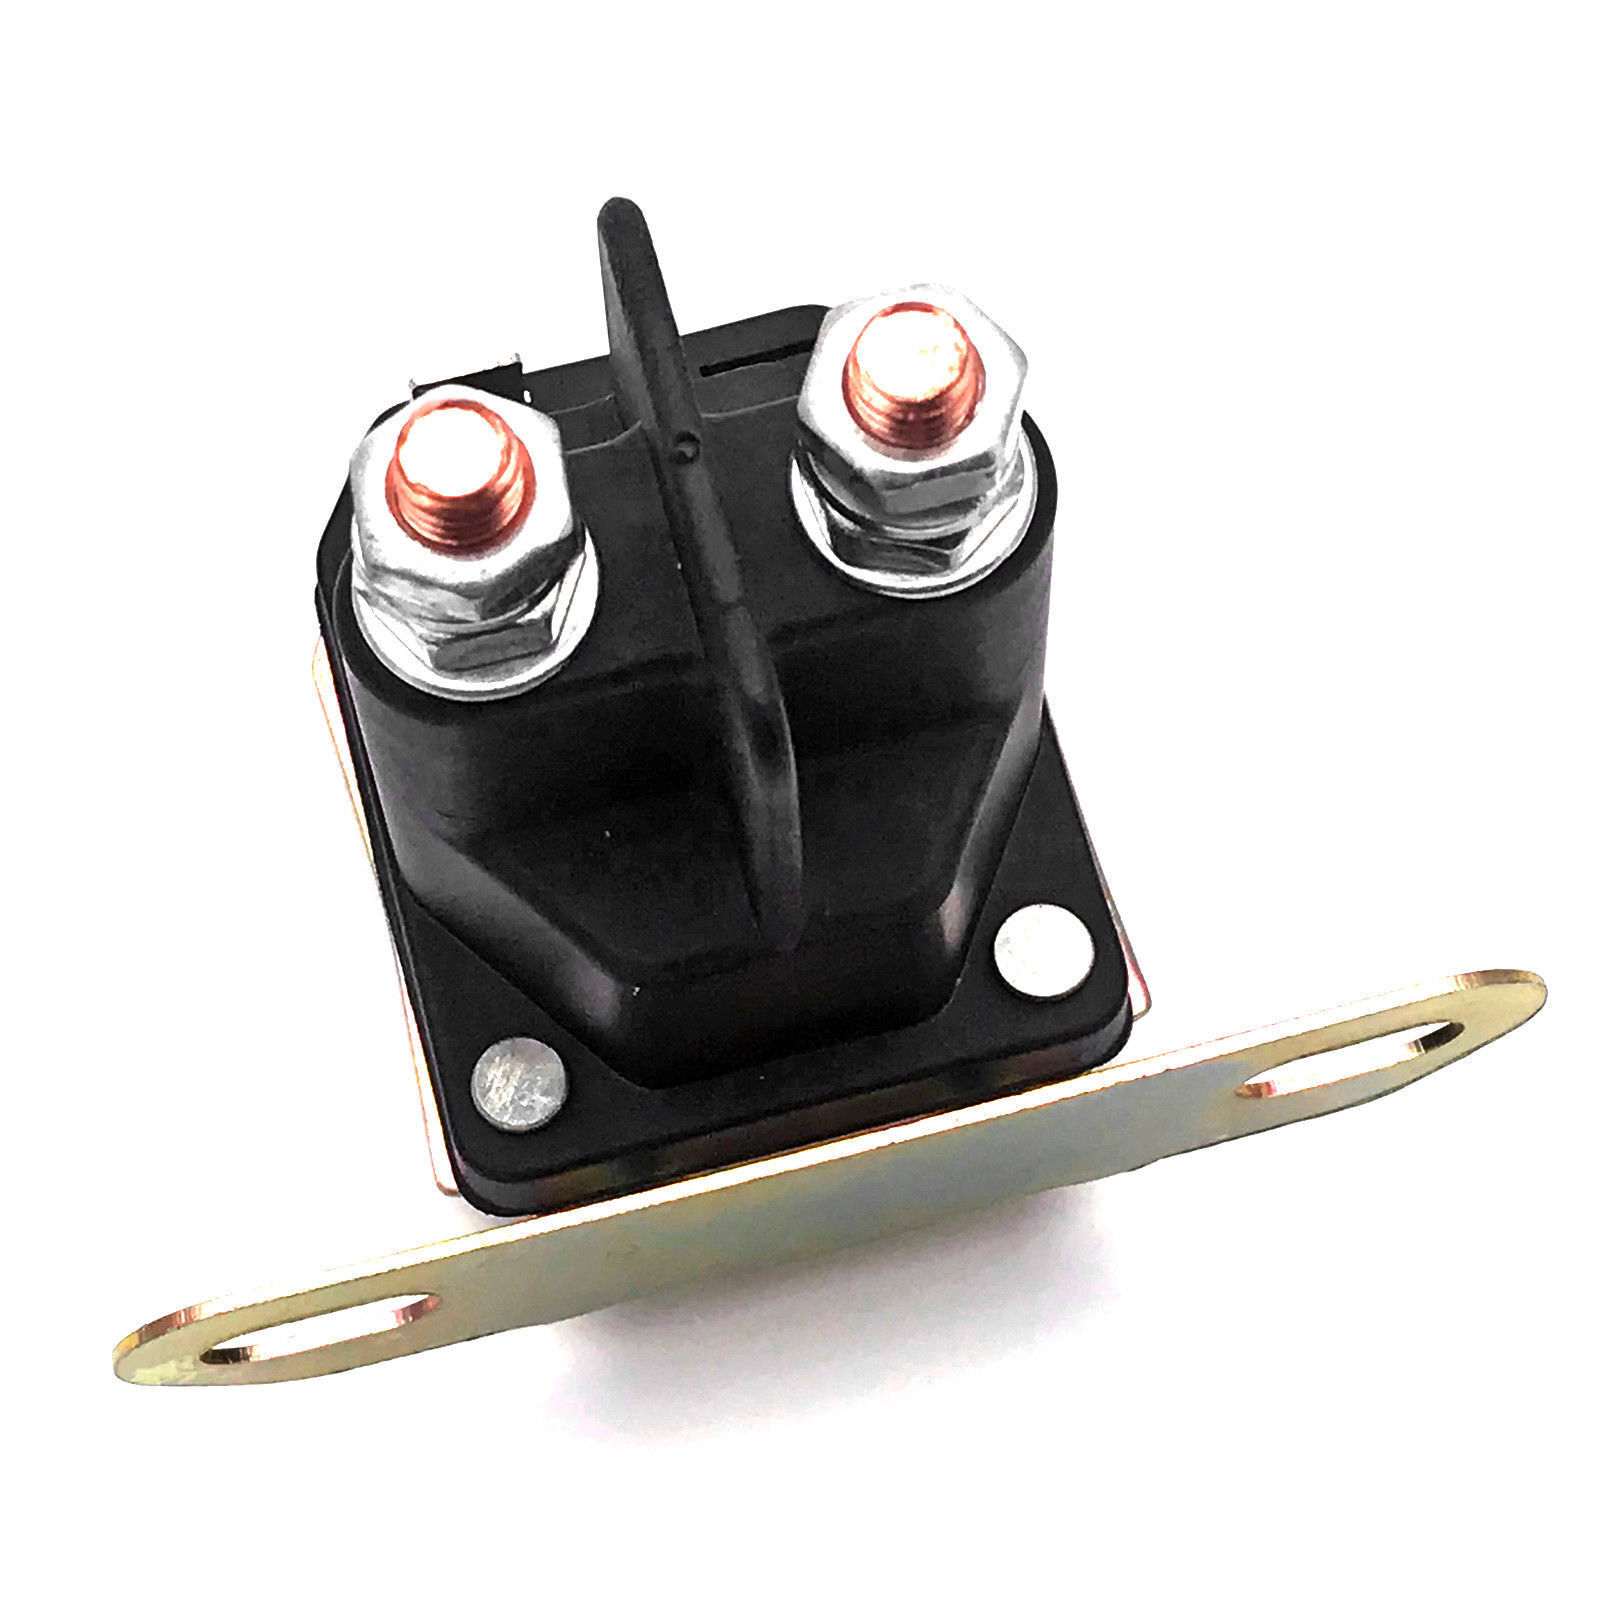 New Solenoid Relay Switch for Stens 435-0100 ATV Snowmobile,Golf Cart,Lawn 12V